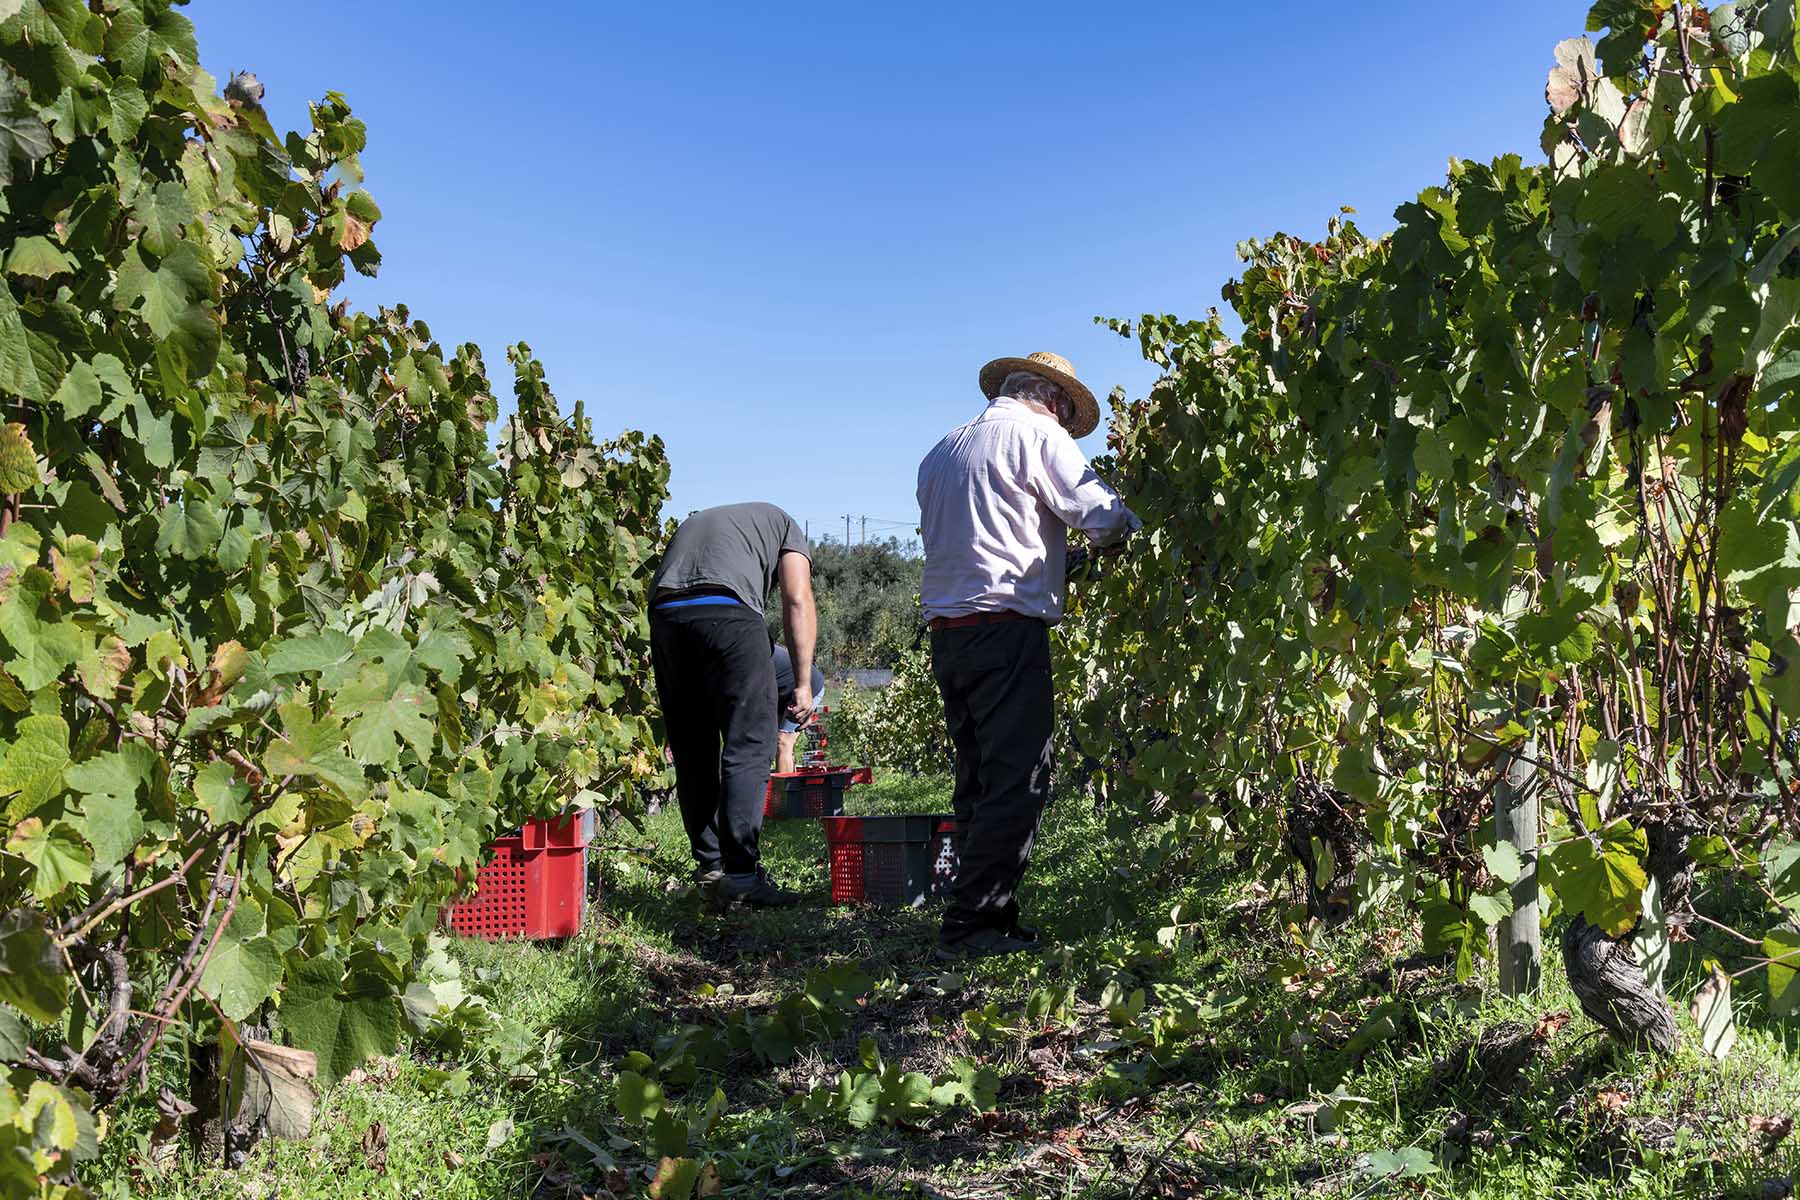 Three men standing between rows of grapevines, busy harvesting grapes into red fruit boxes on the ground.